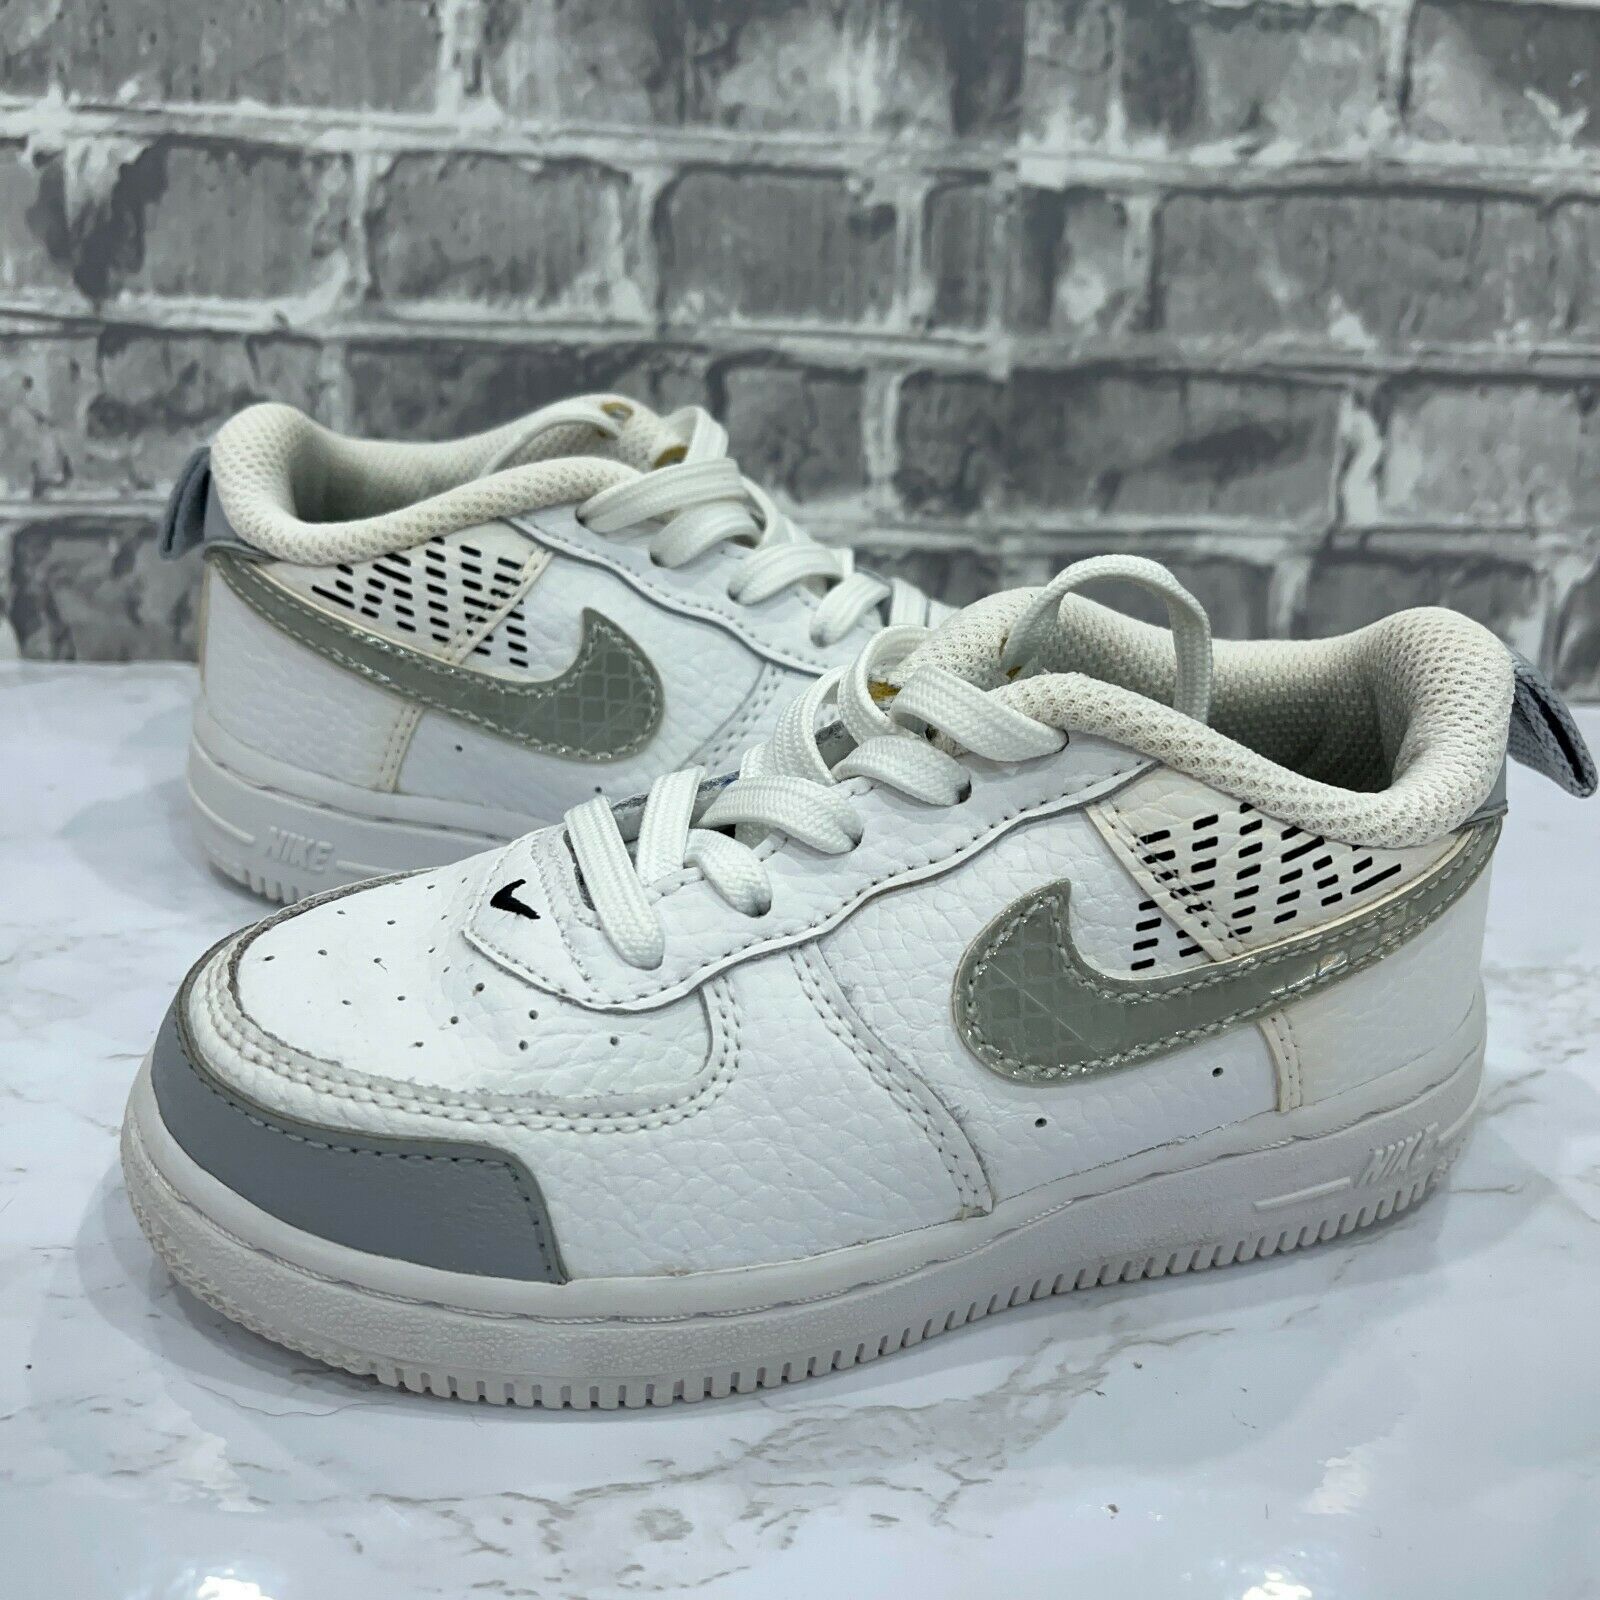 Nike Force 1 LV8 2(TD) Toddlers' Shoes White Wolf Grey Black CK0830-100 Size 9C